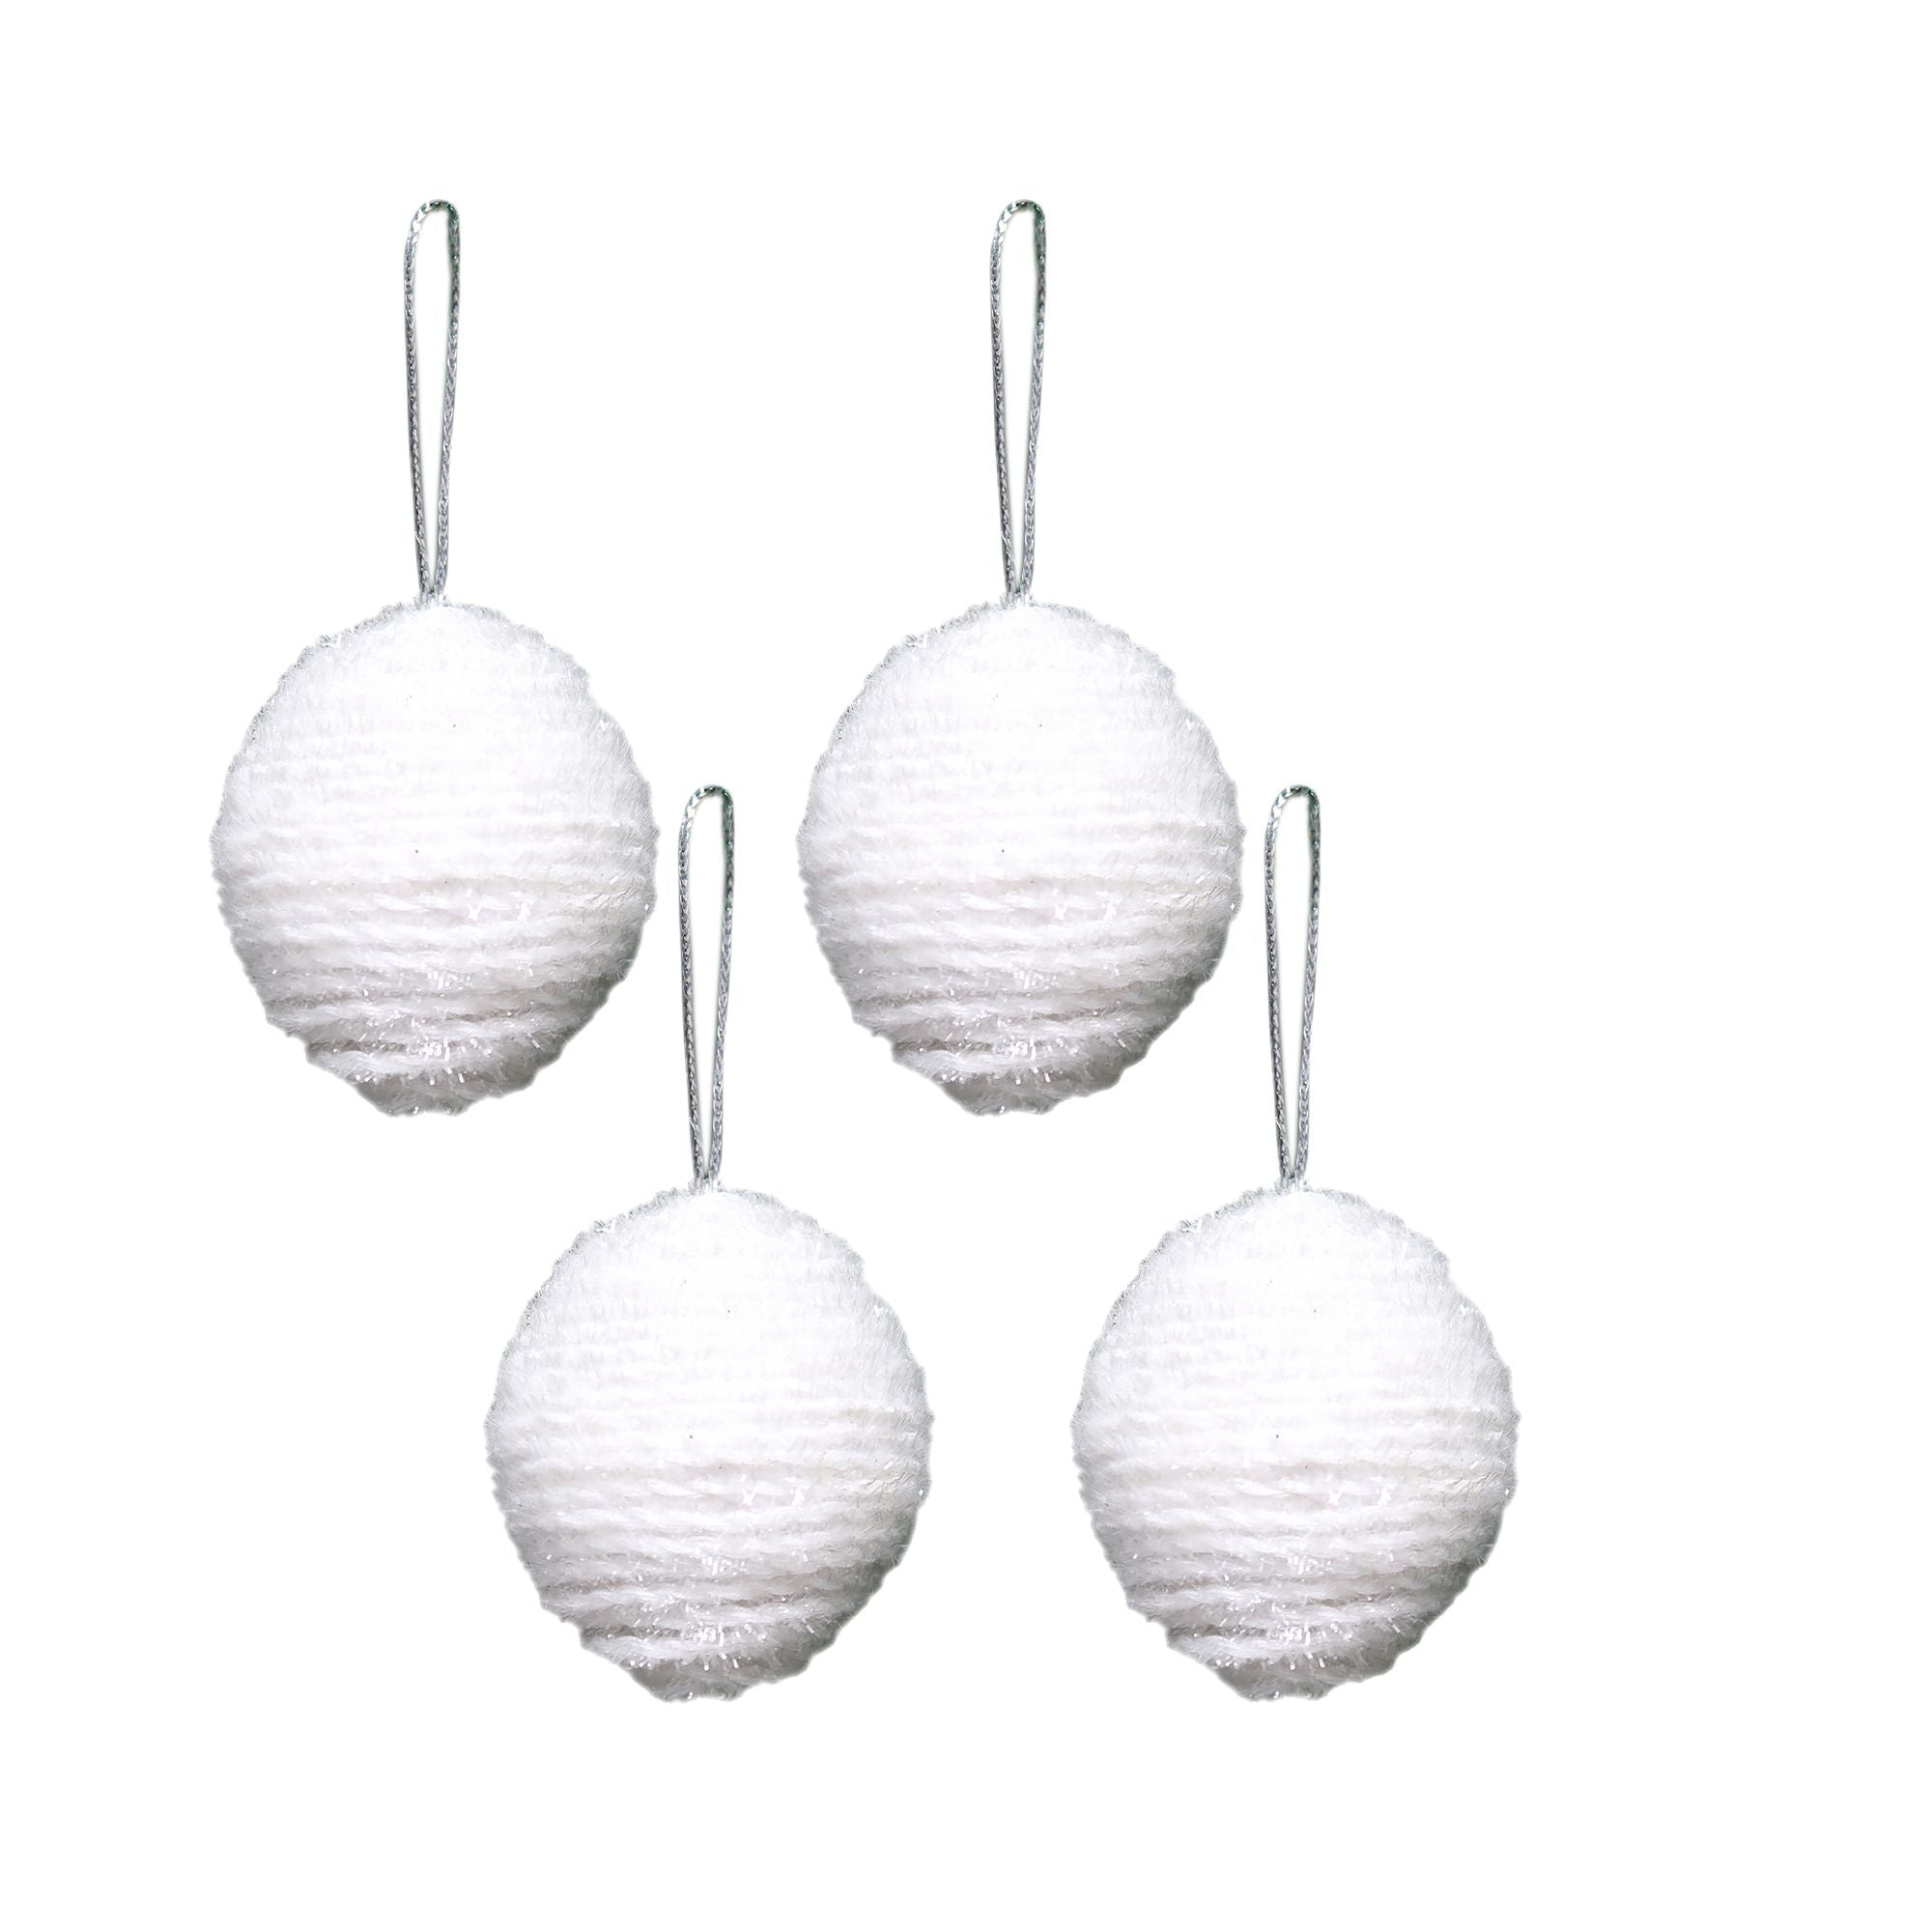 Handmade Christmas Ornaments -Tinsel Baubles, 60mm, Snow White, 4pc